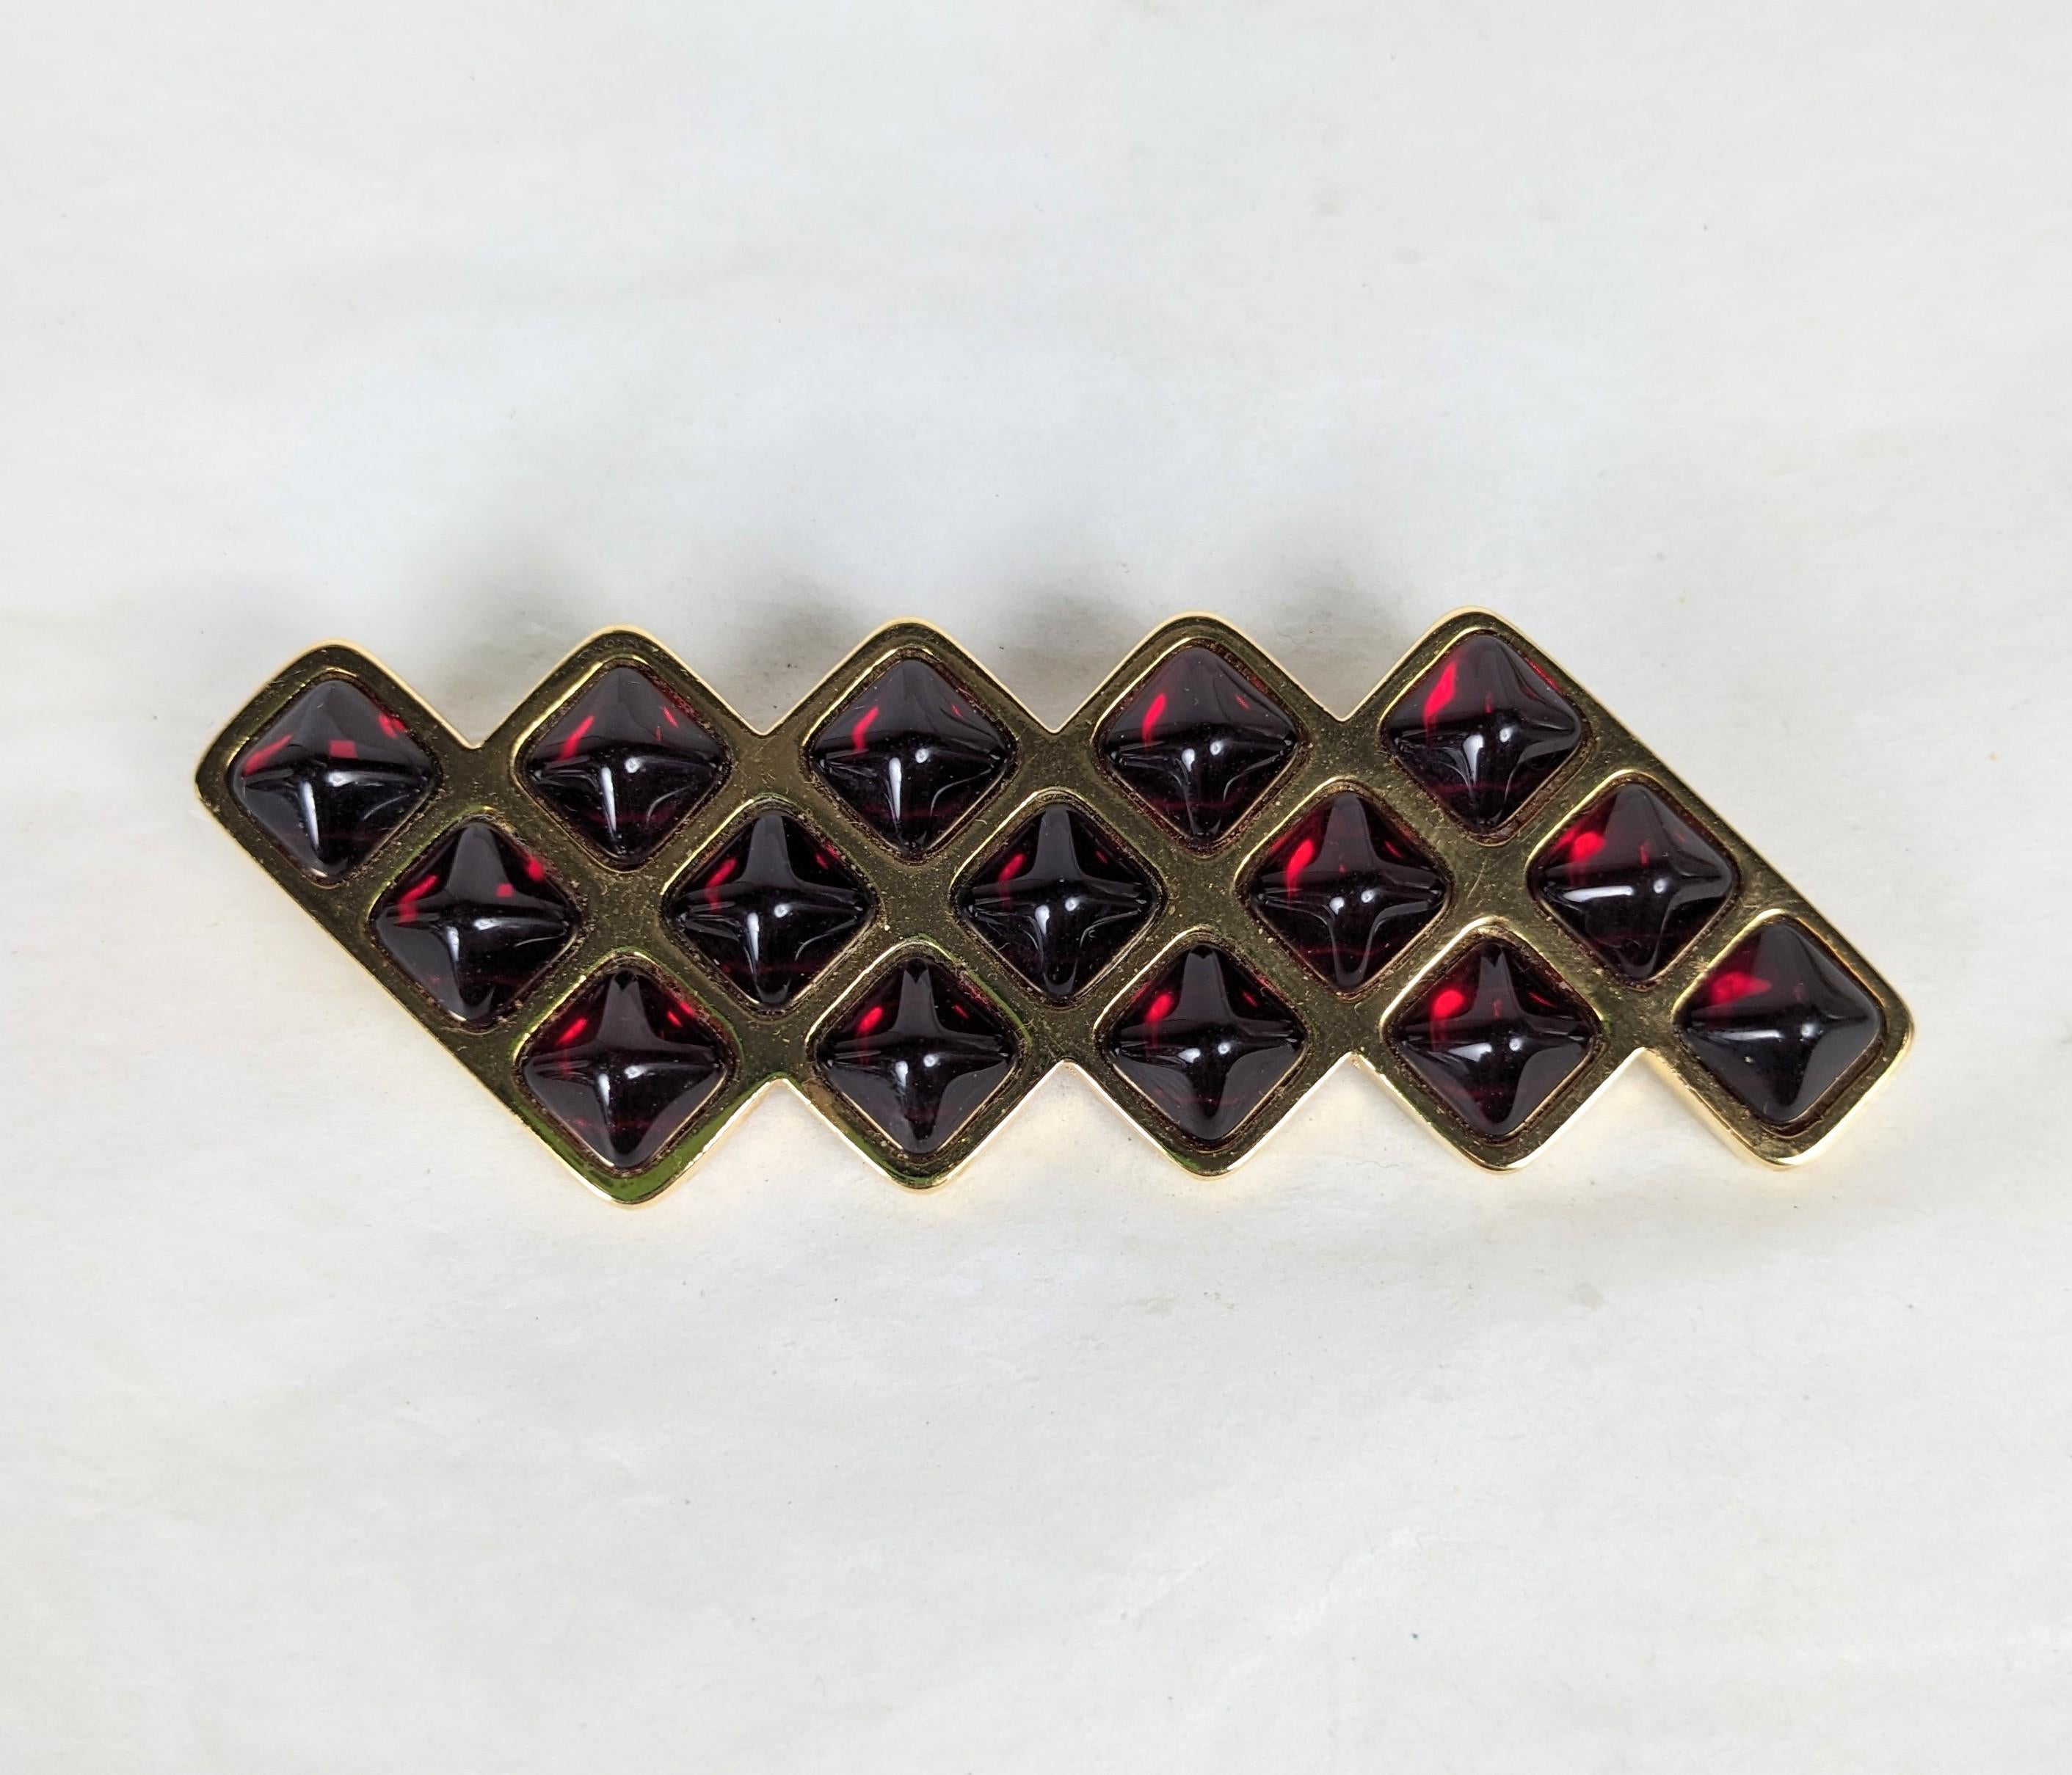 Striking Yves Saint Laurent Ruby Bullet Cab Brooch from the 1990's. Made by Maison Goossens in gilt metal in a Deco style design with square red bullet cabs. 3.25 x 1